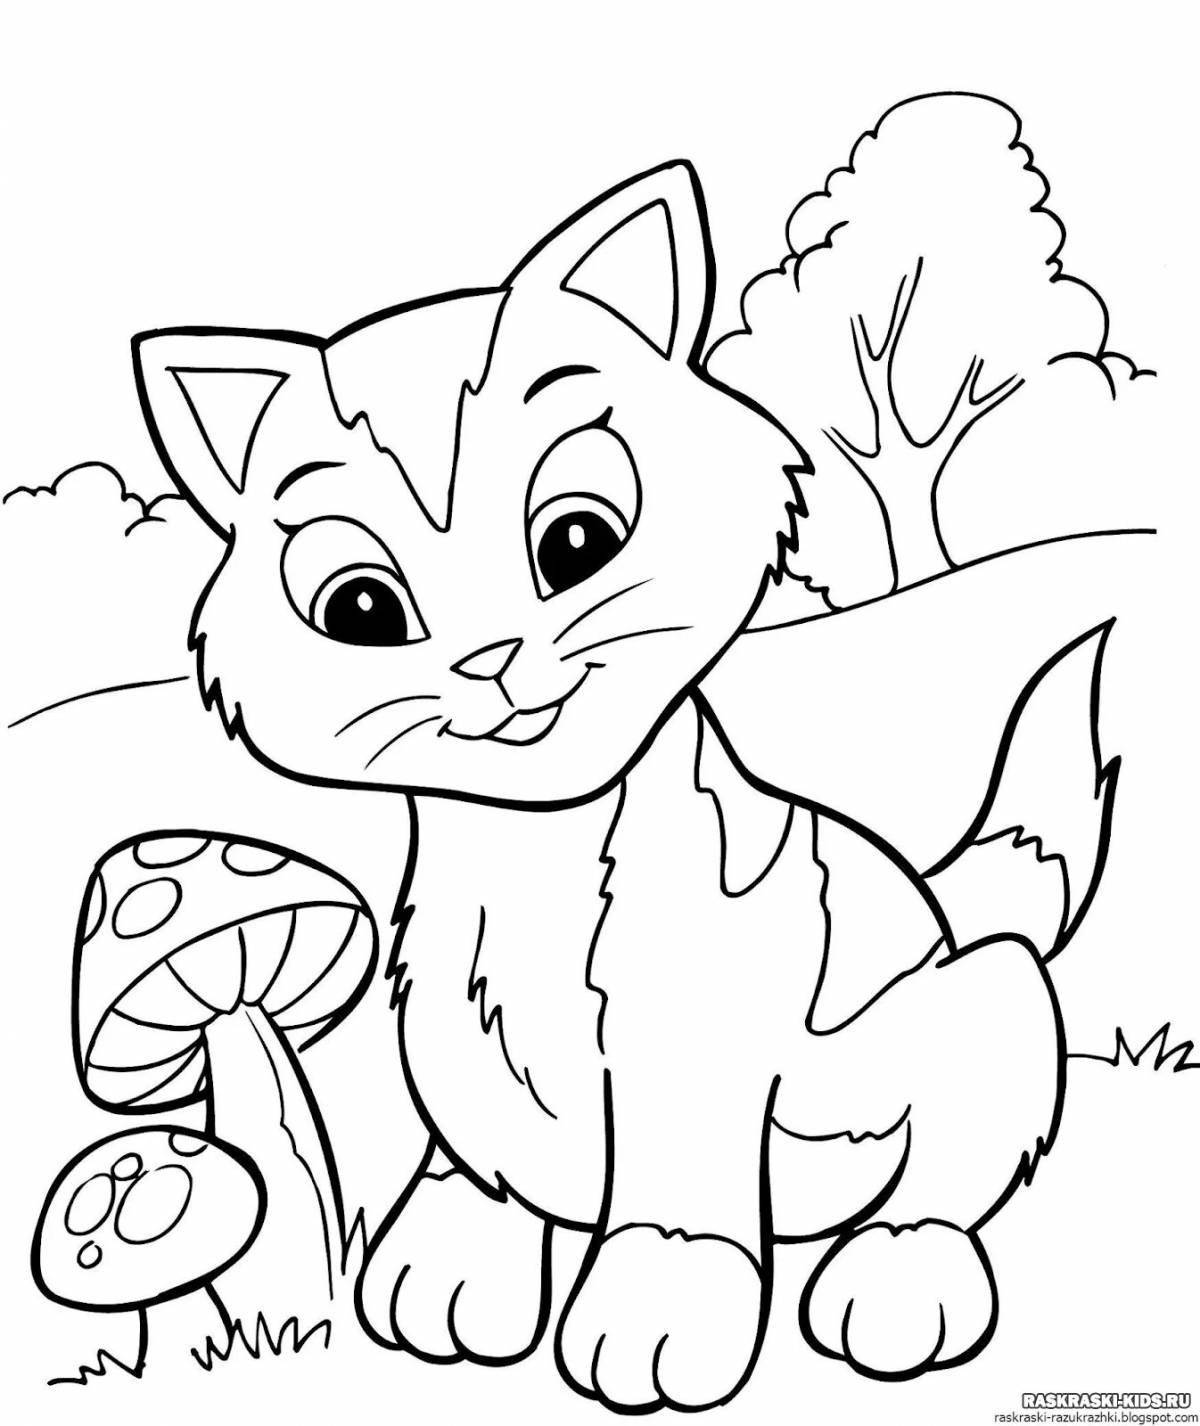 Charming coloring book for girls 5 years old with animals